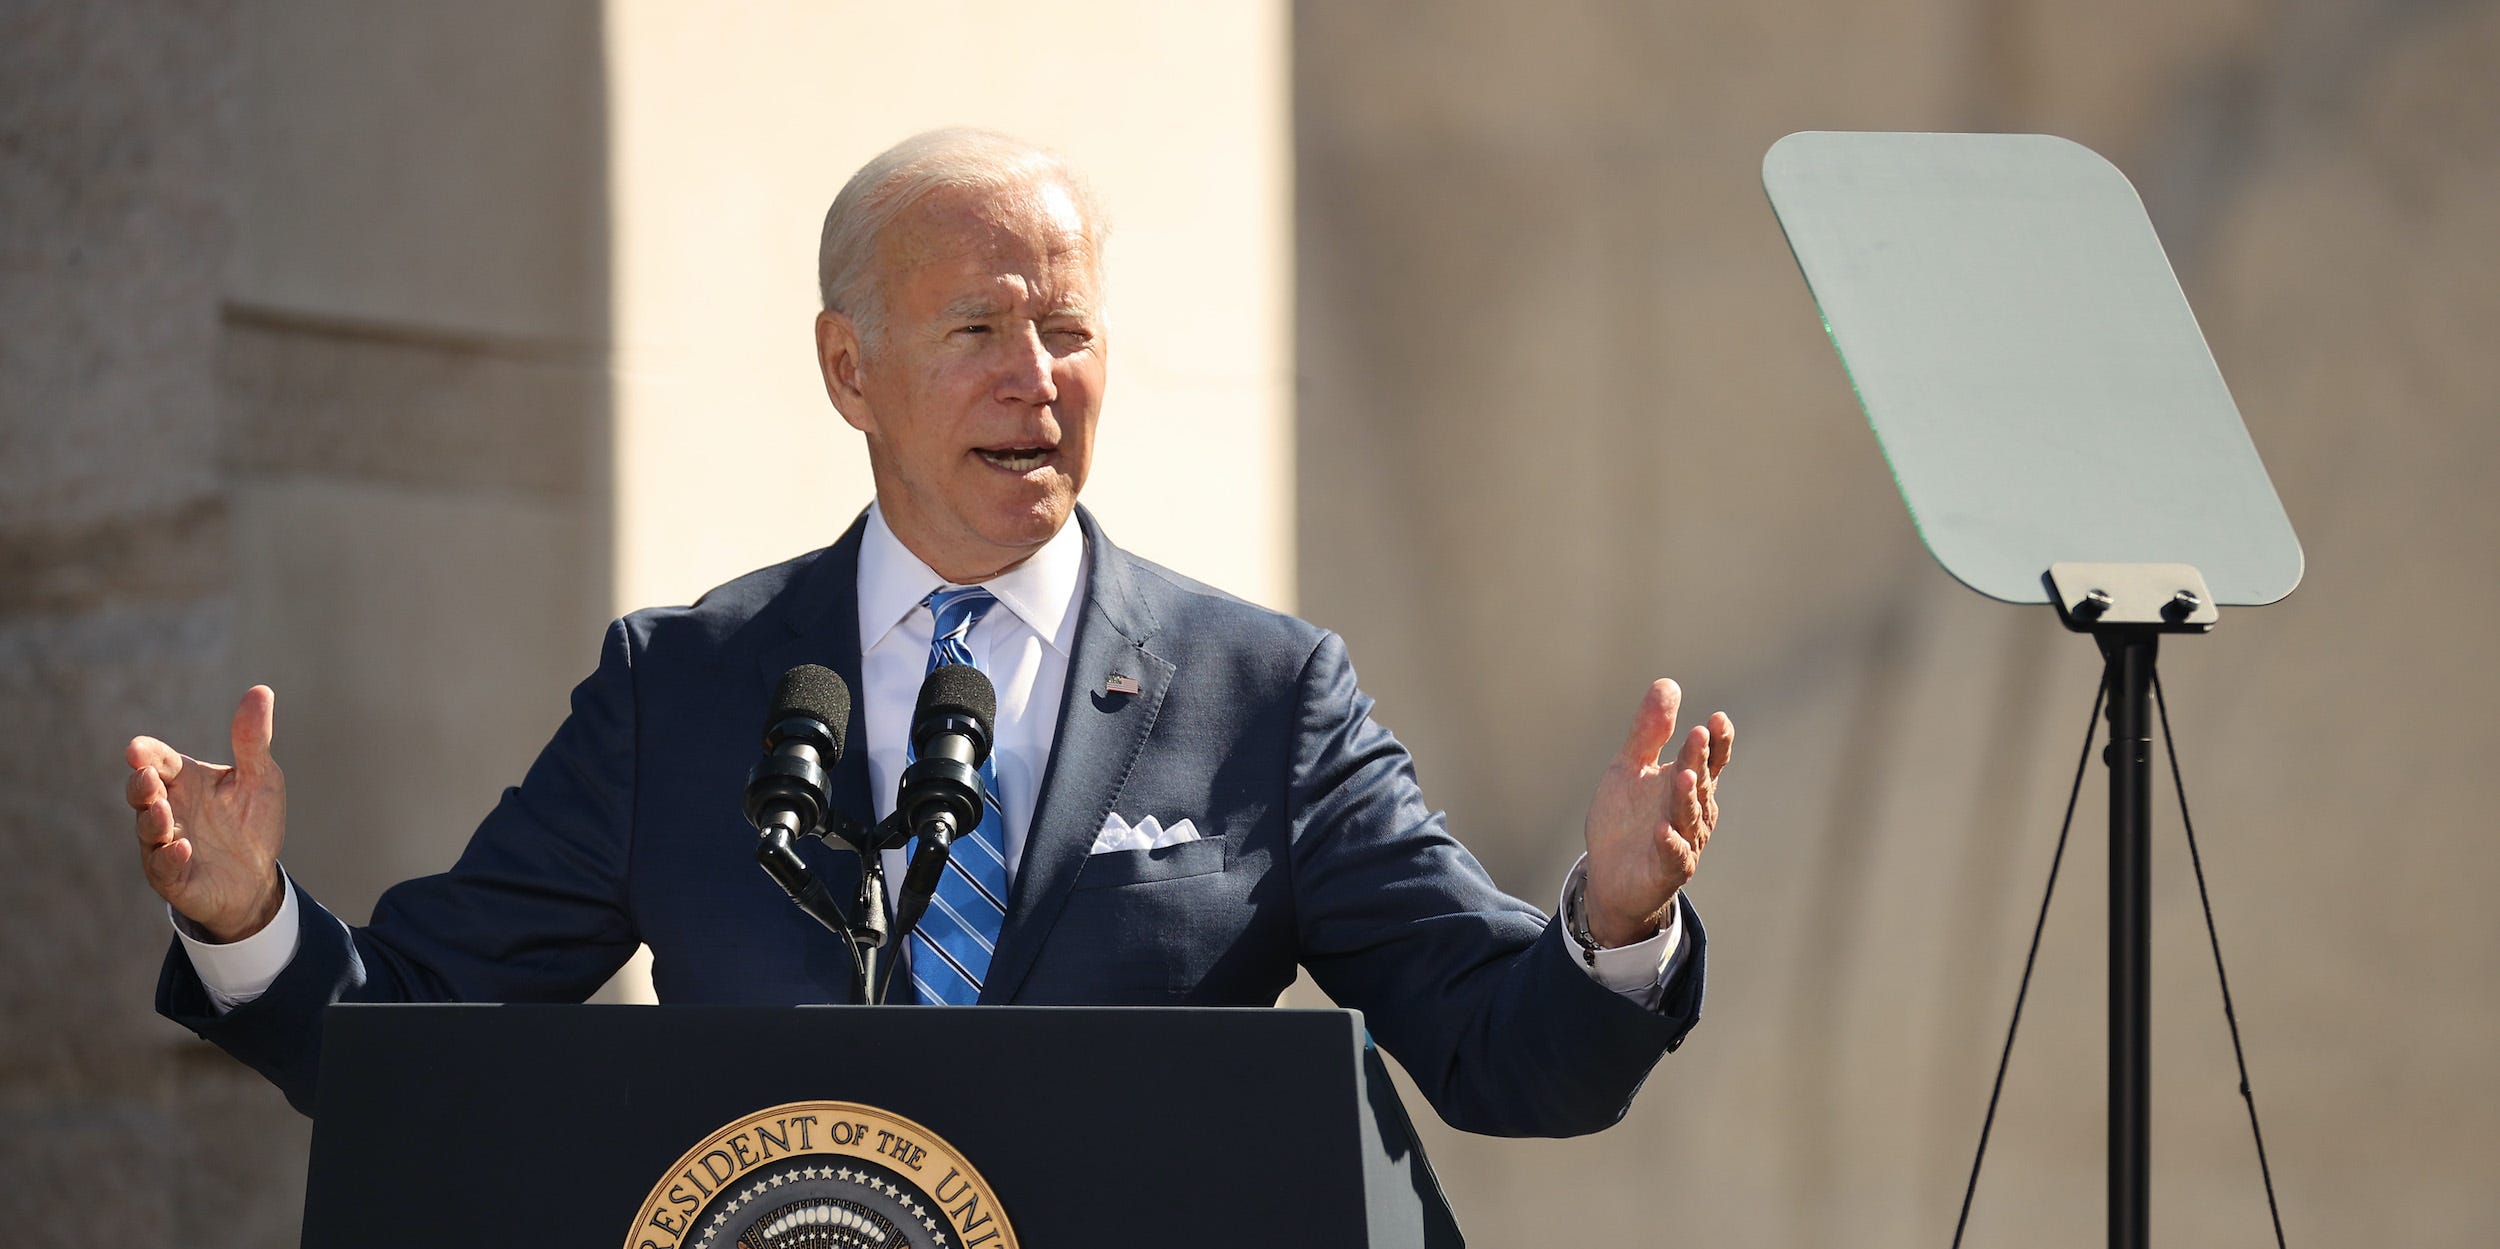 President Joe Biden speaks in front of the Martin Luther King Jr. memorial, gesturing with open palms to his sides while looking toward a teleprompter.